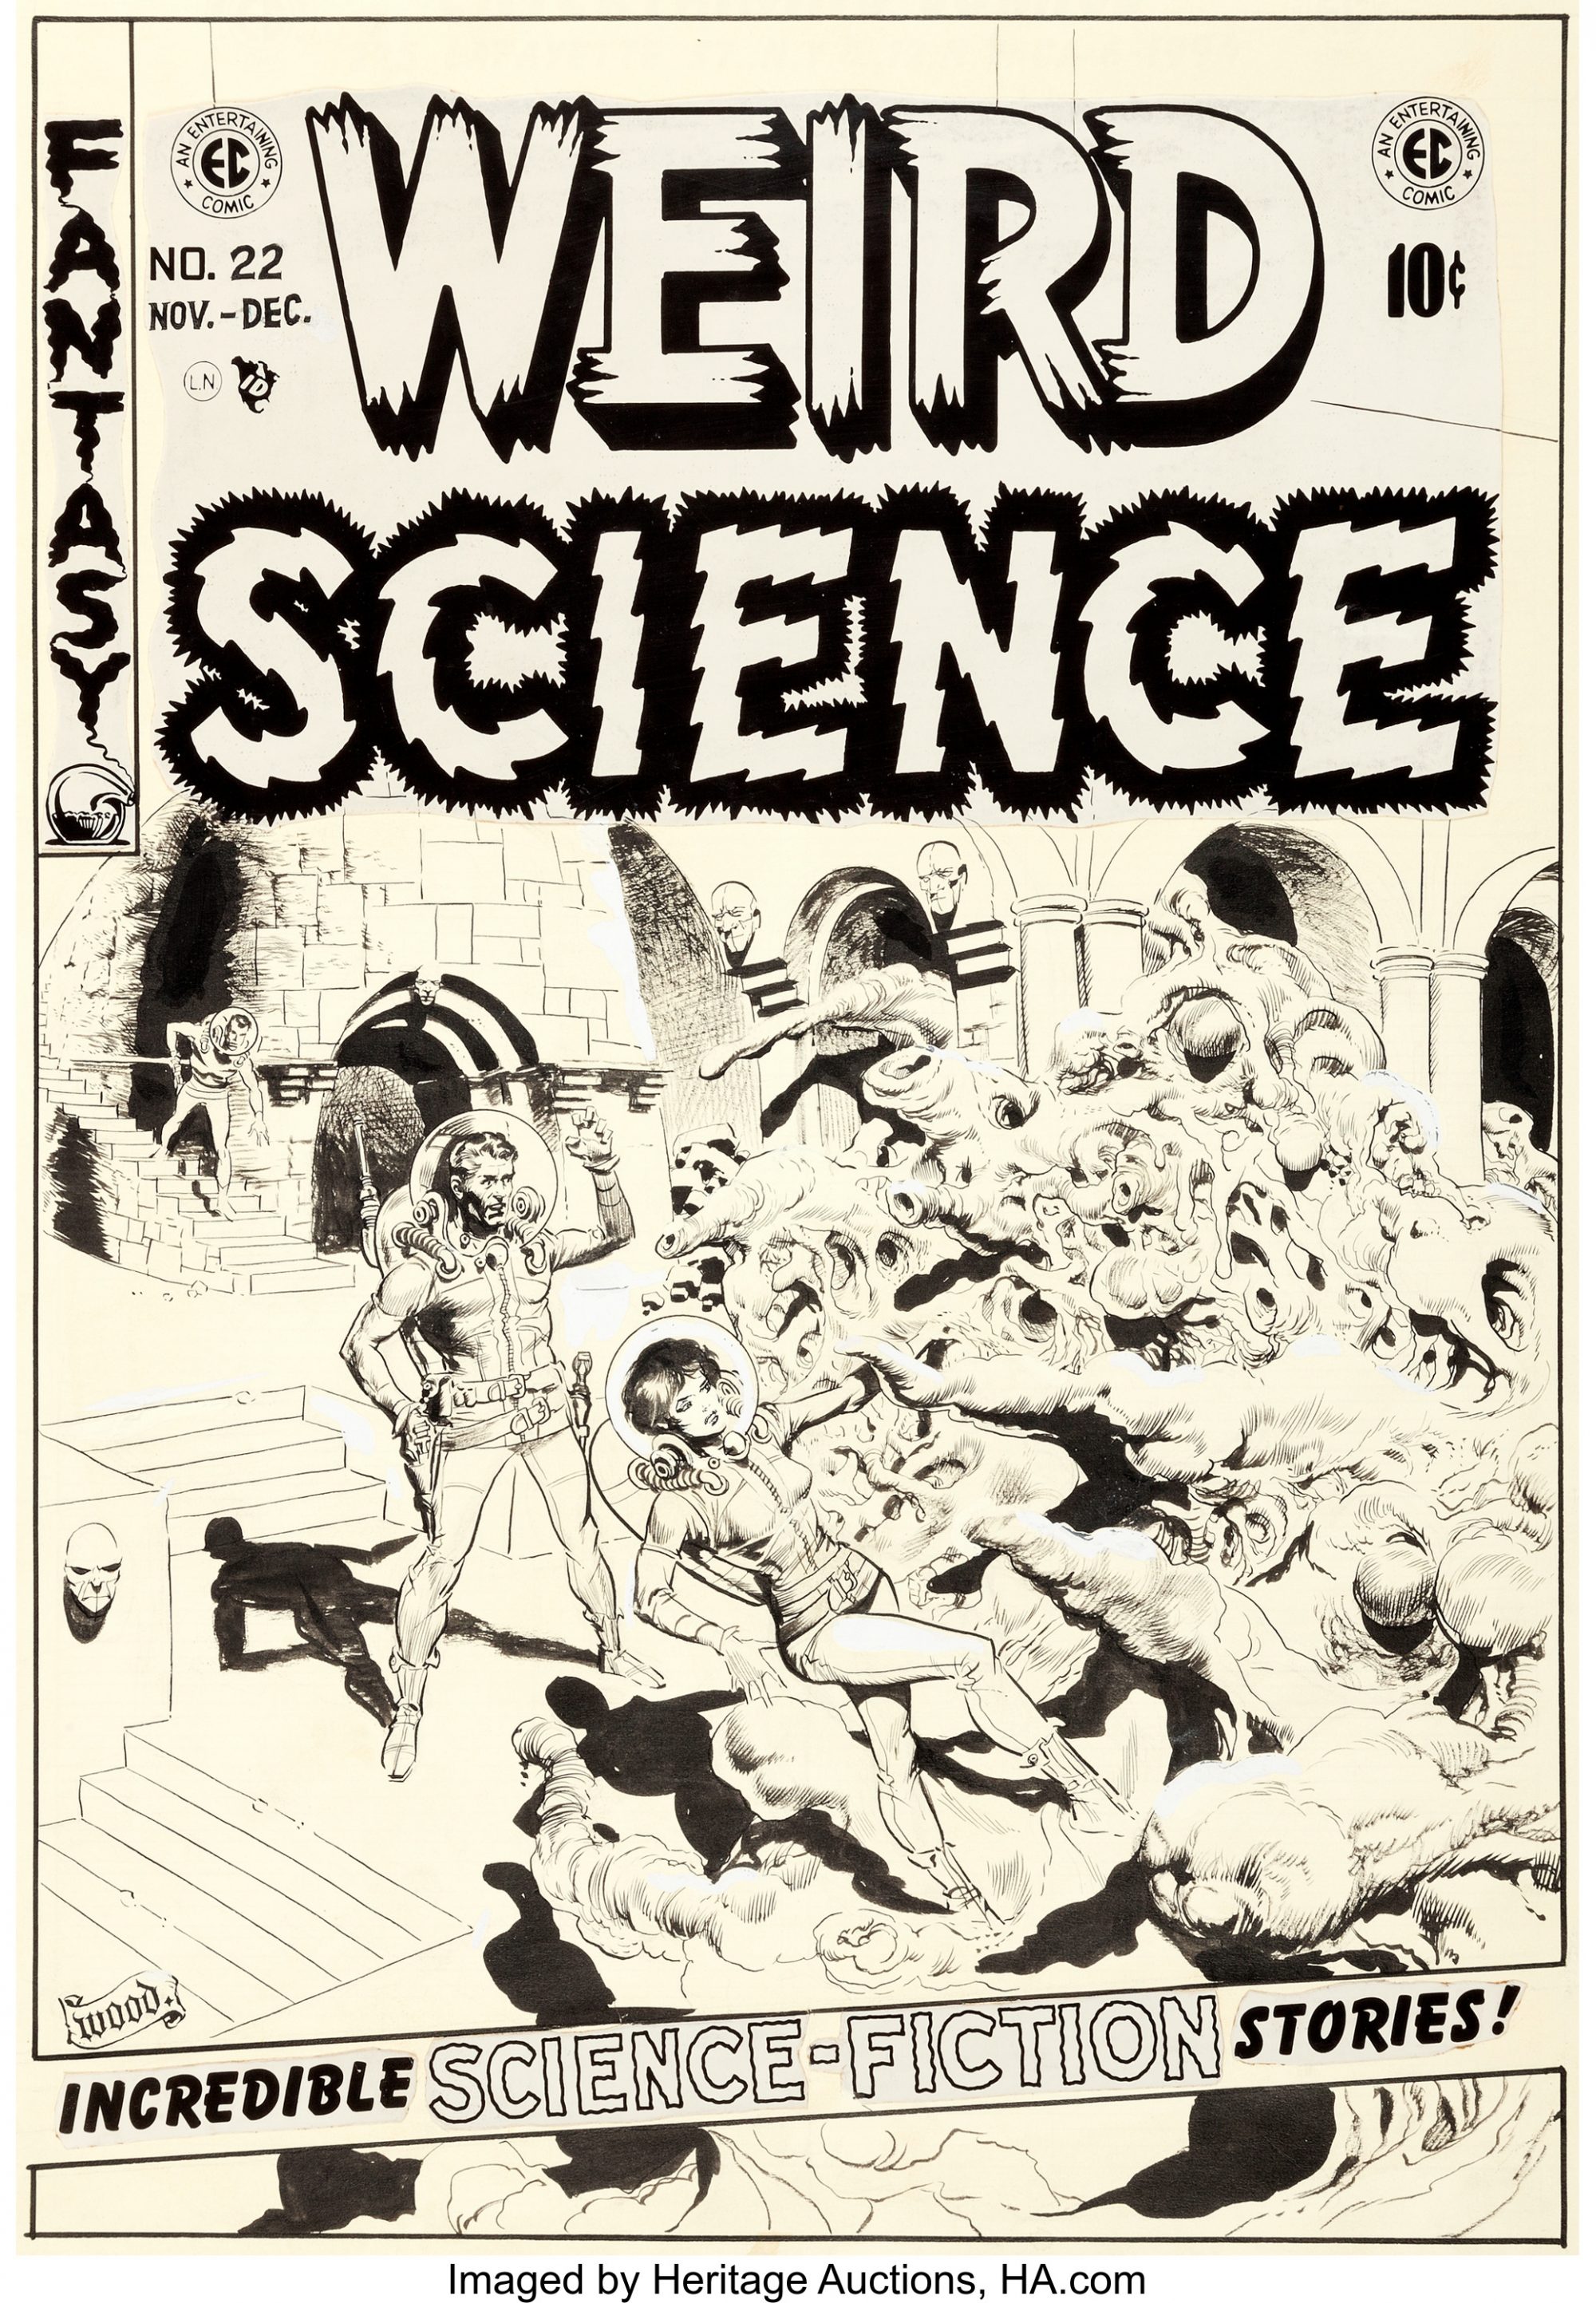 Wally Wood Weird Science #22 cover